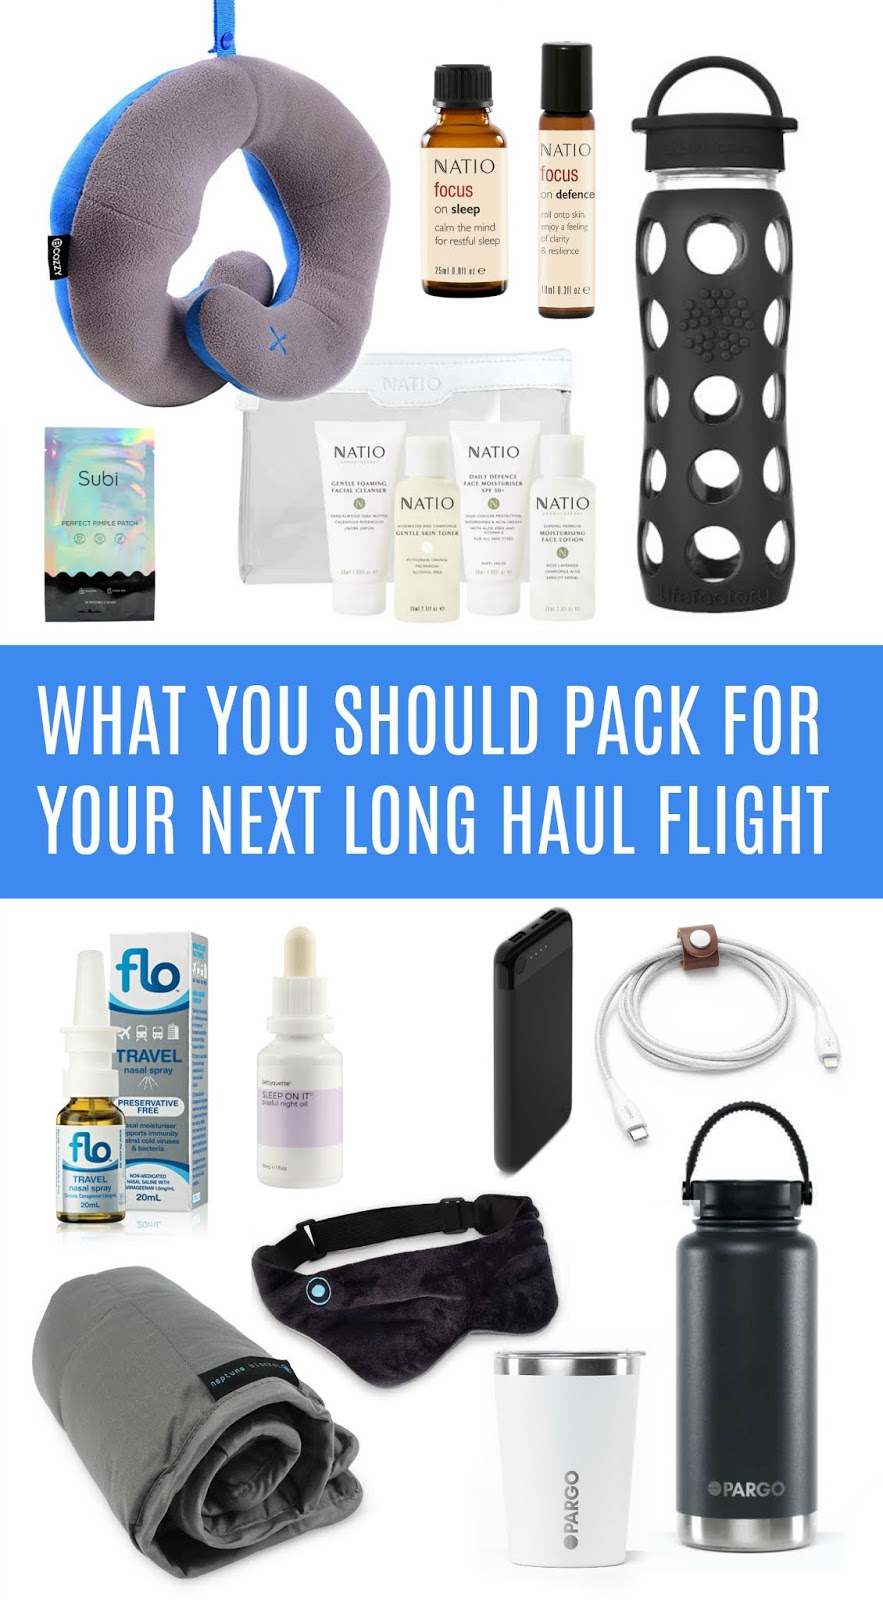 My Favorite Travel Accessories for Long-Haul Flights - Let's Be Merry